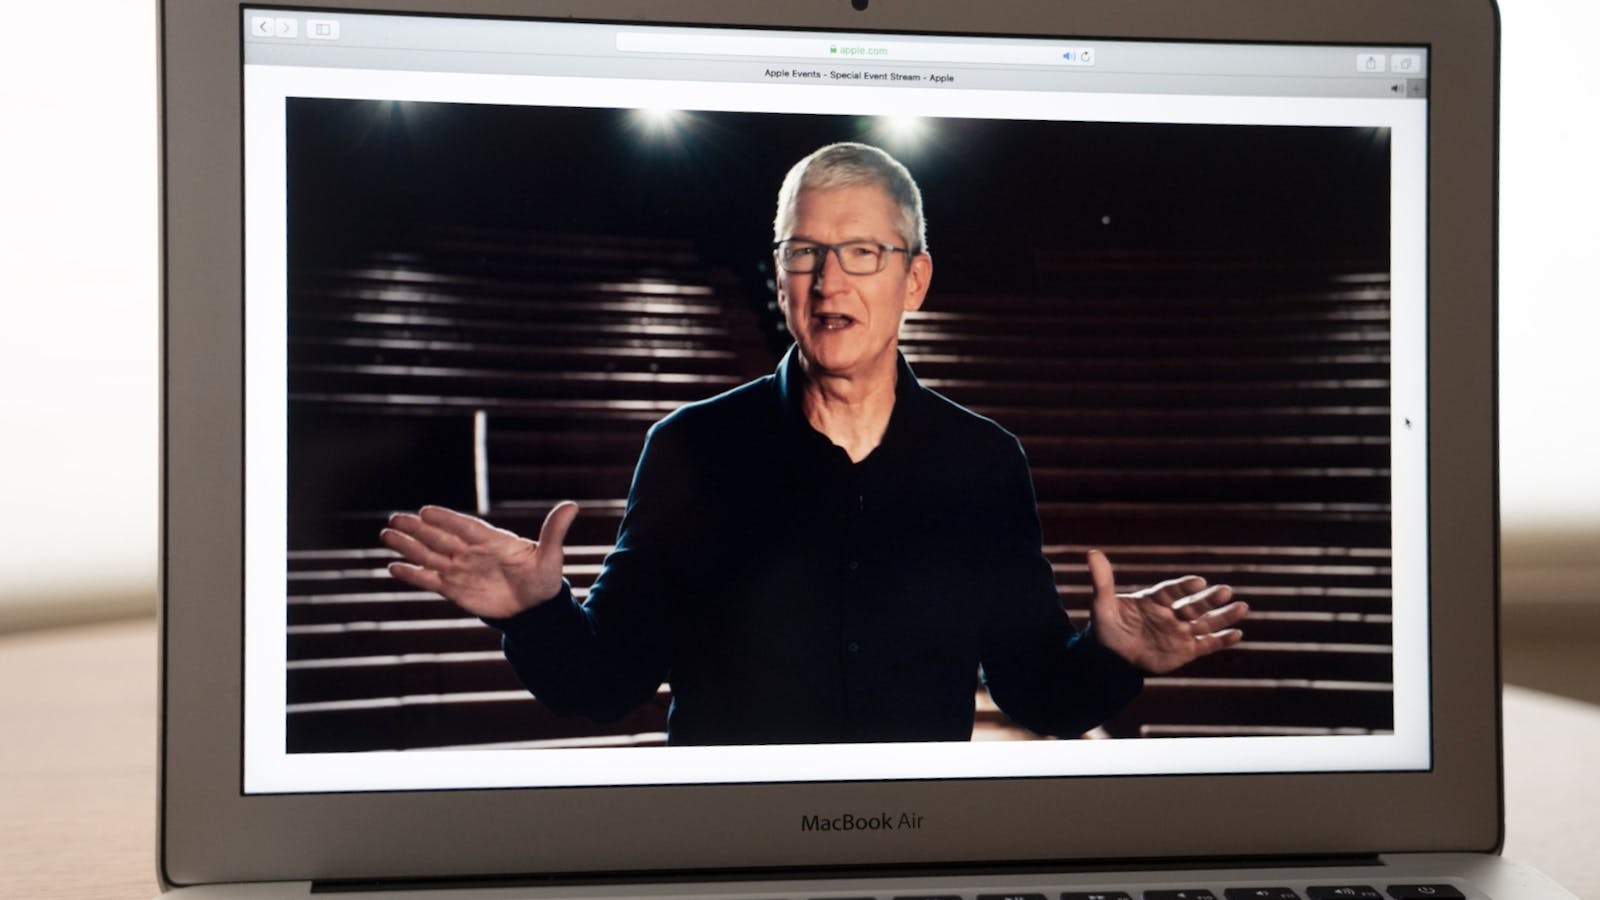 Tim Cook presenting at an Apple product event. Photo: Bloomberg